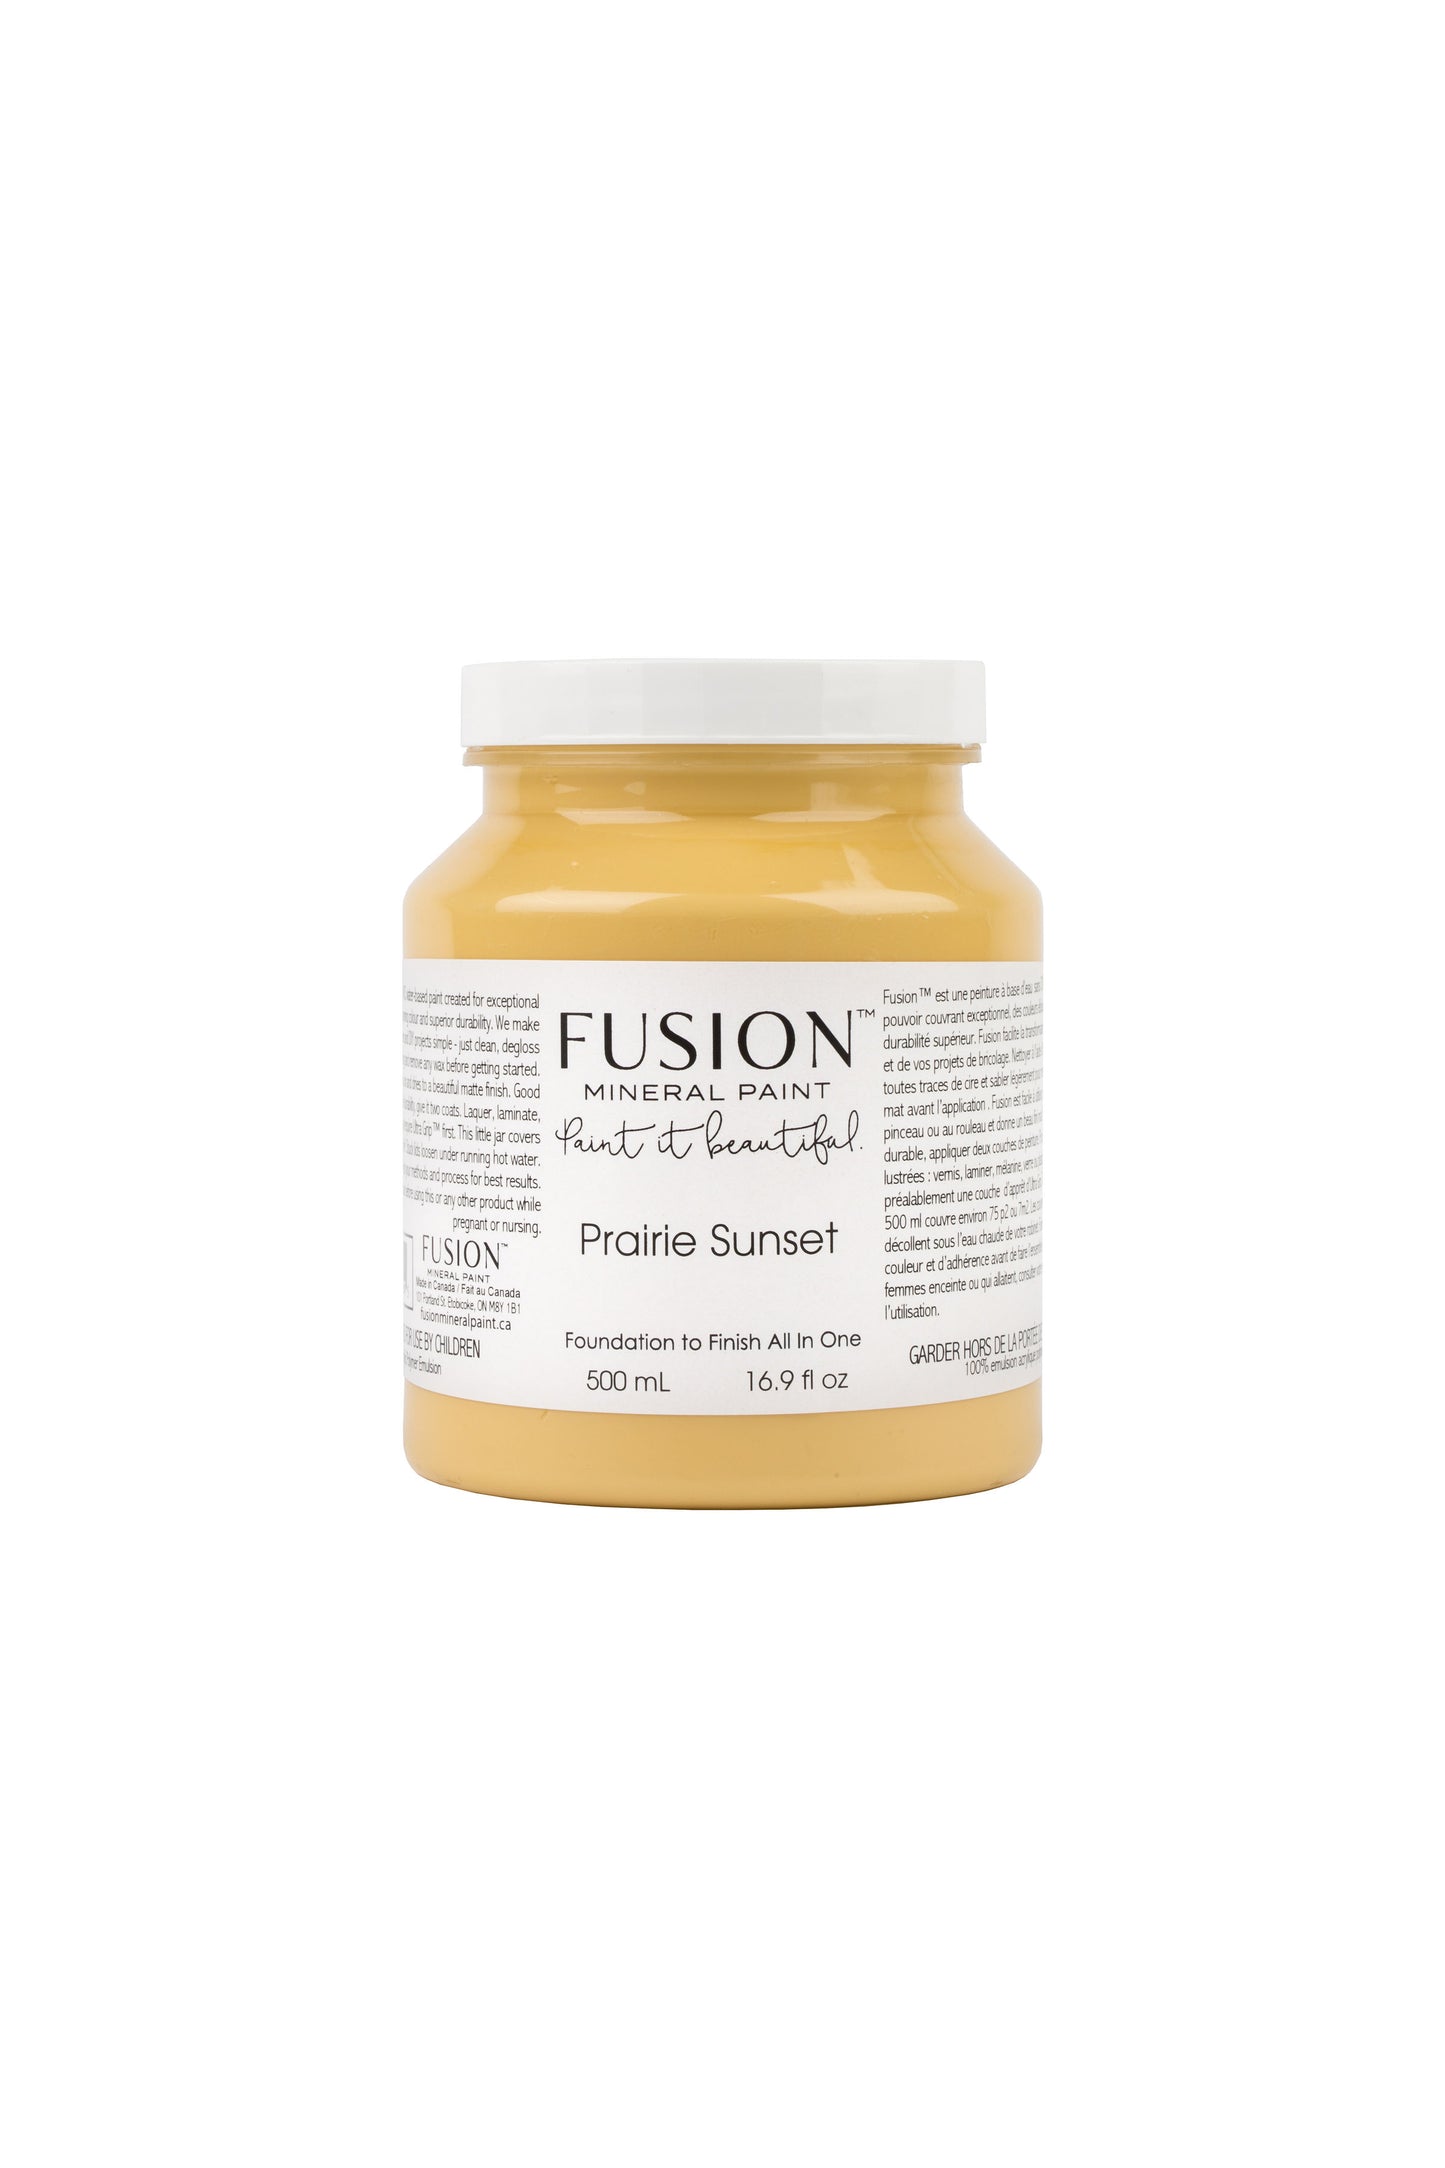 Prairie Sunset Fusion Mineral Paint, Warm Yellow Paint Color| 500ml Pint Size